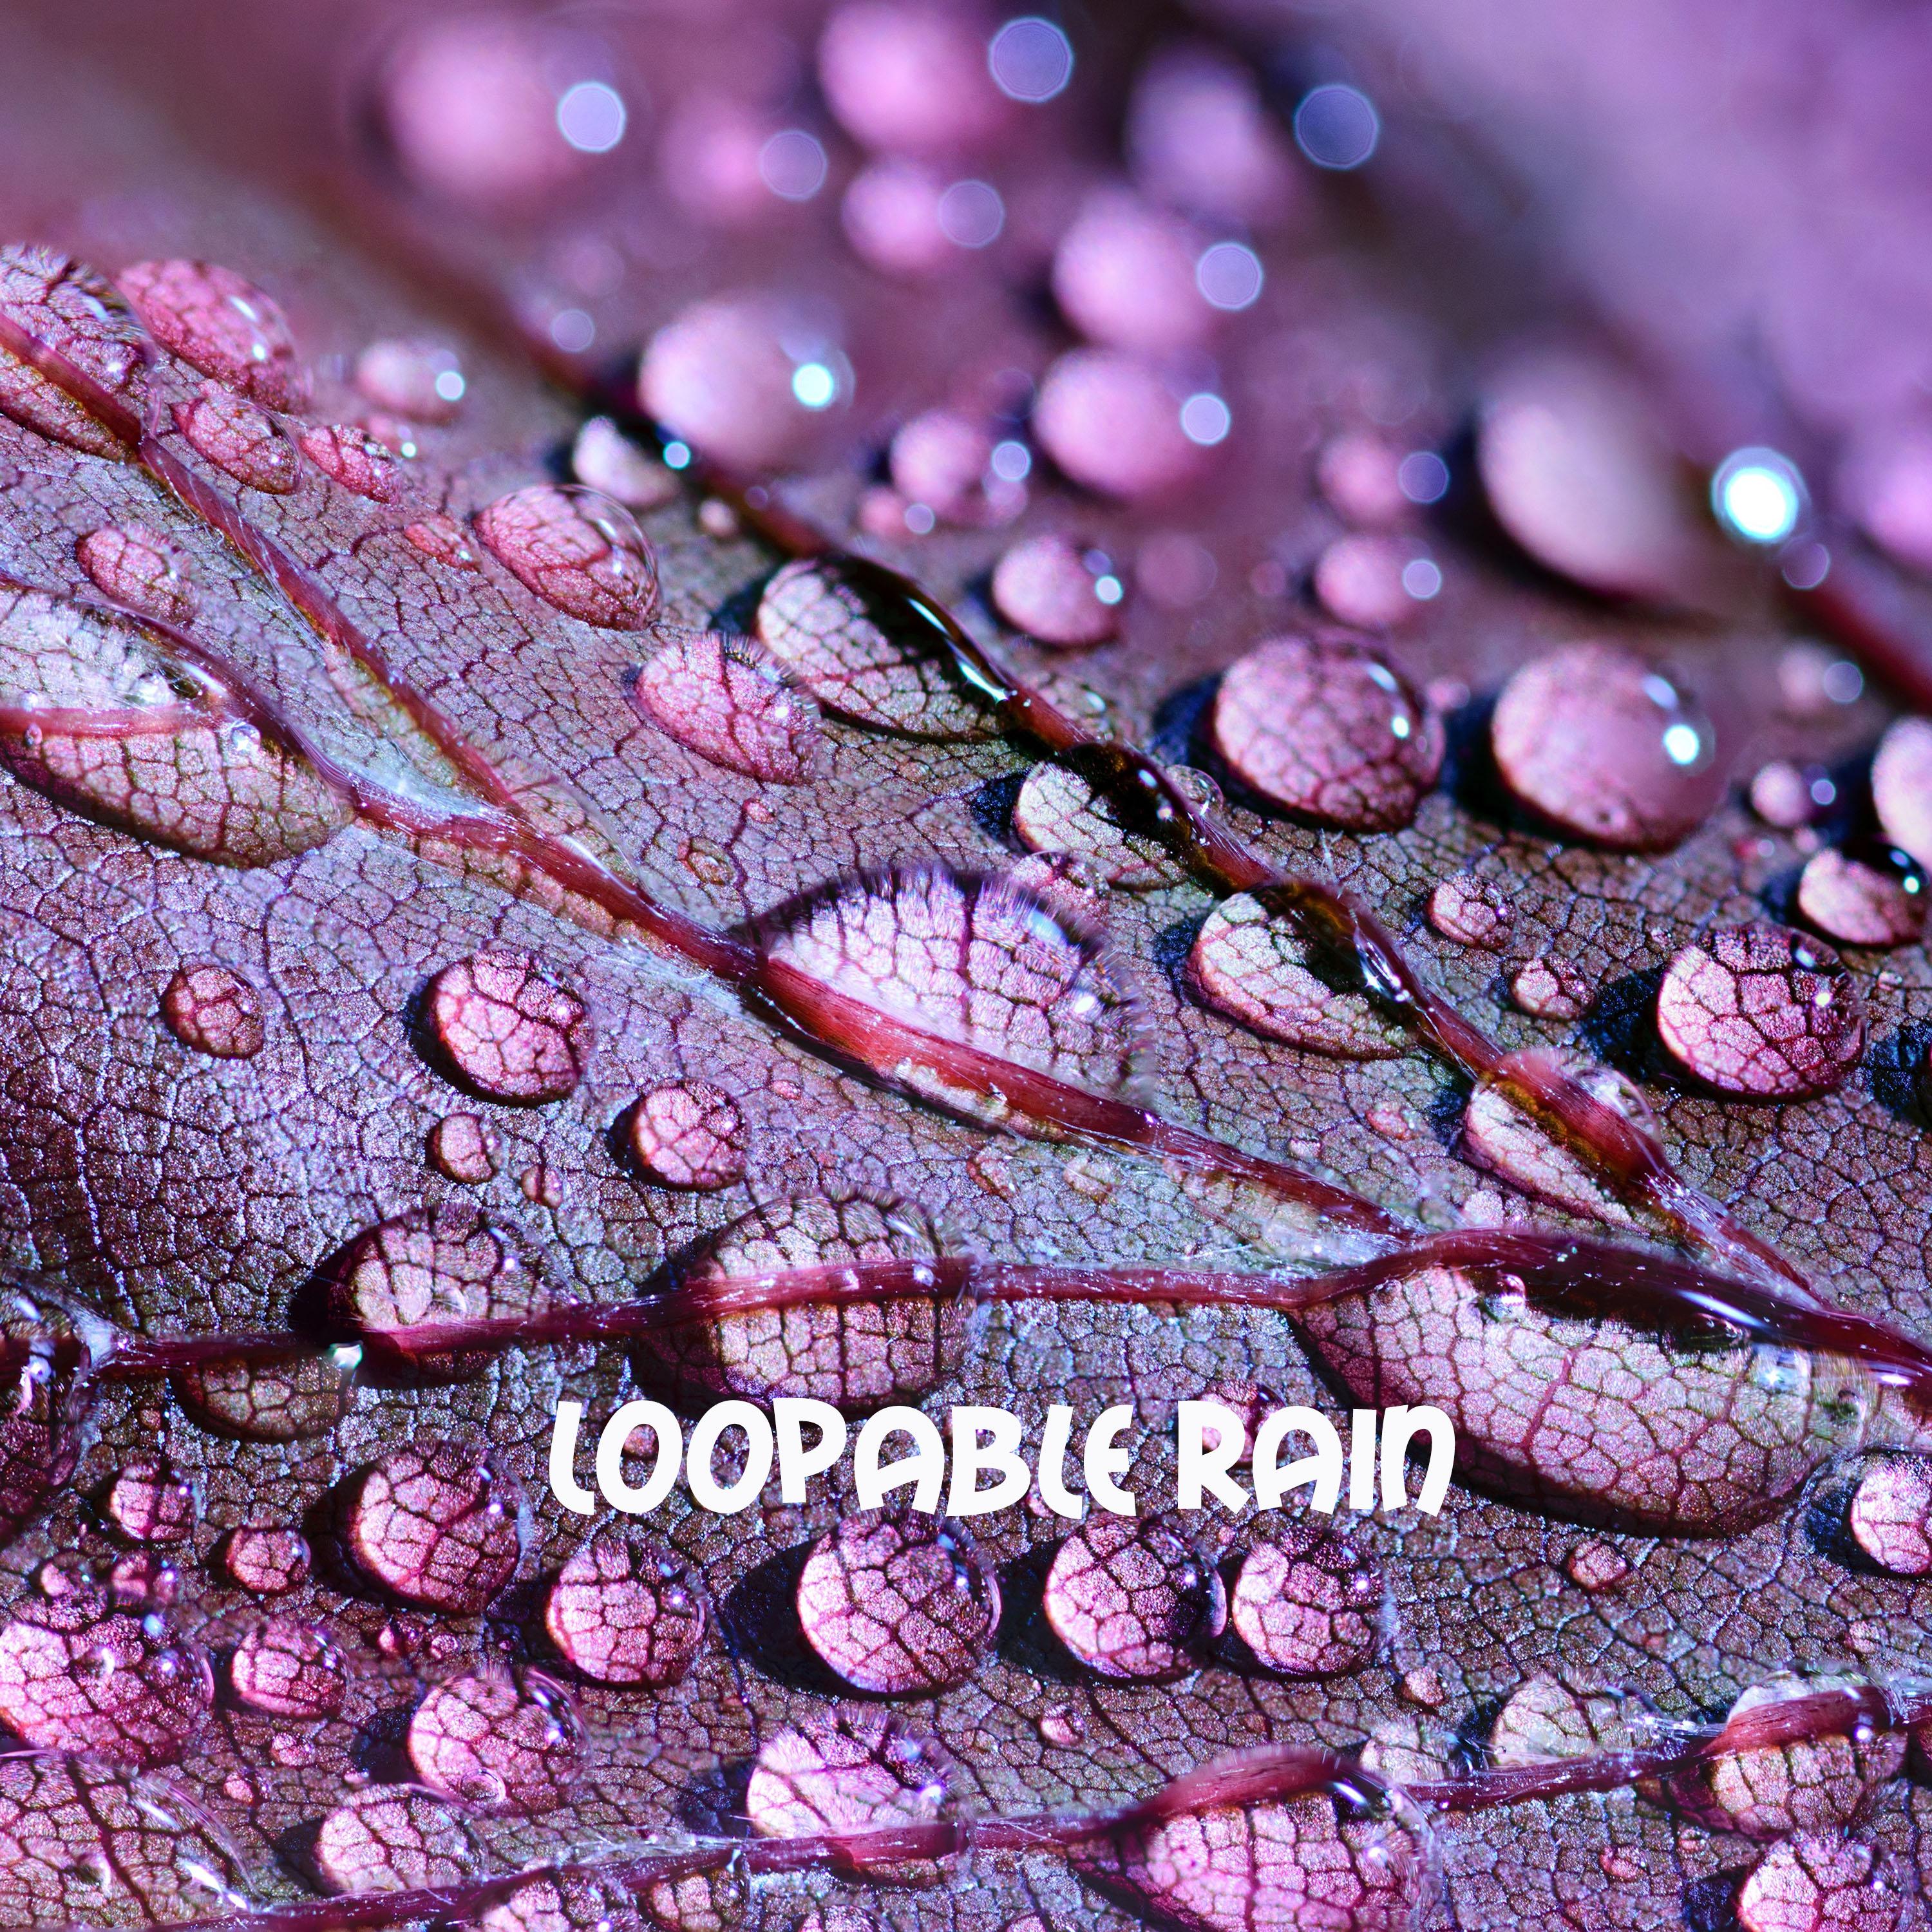 15 Loopable Rain and Nature Sounds for Sleep - Zen Rain Sounds, Meditation Rain Sounds